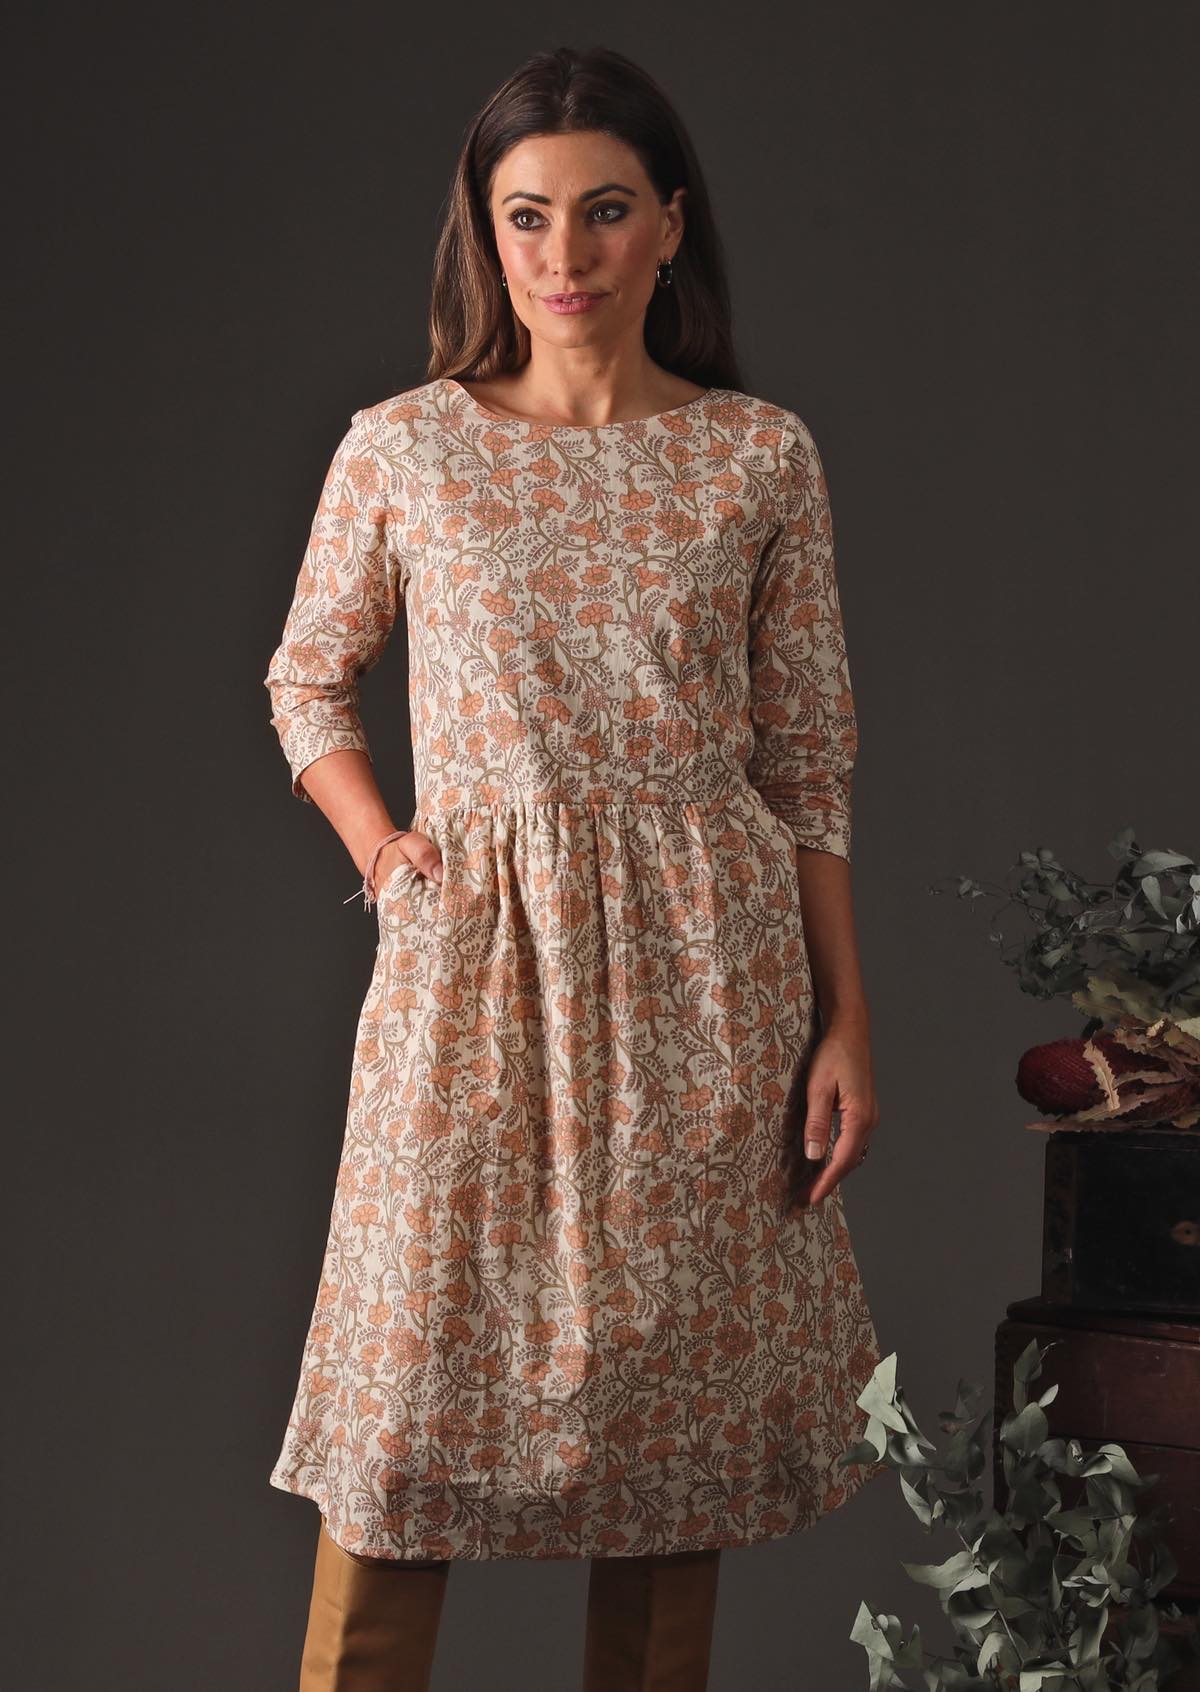 Briar Dress Liberty lightweight 100% cotton lined 3/4 sleeve high neck over knee length relaxed fit Liberty print dress with pockets | Karma East Australia